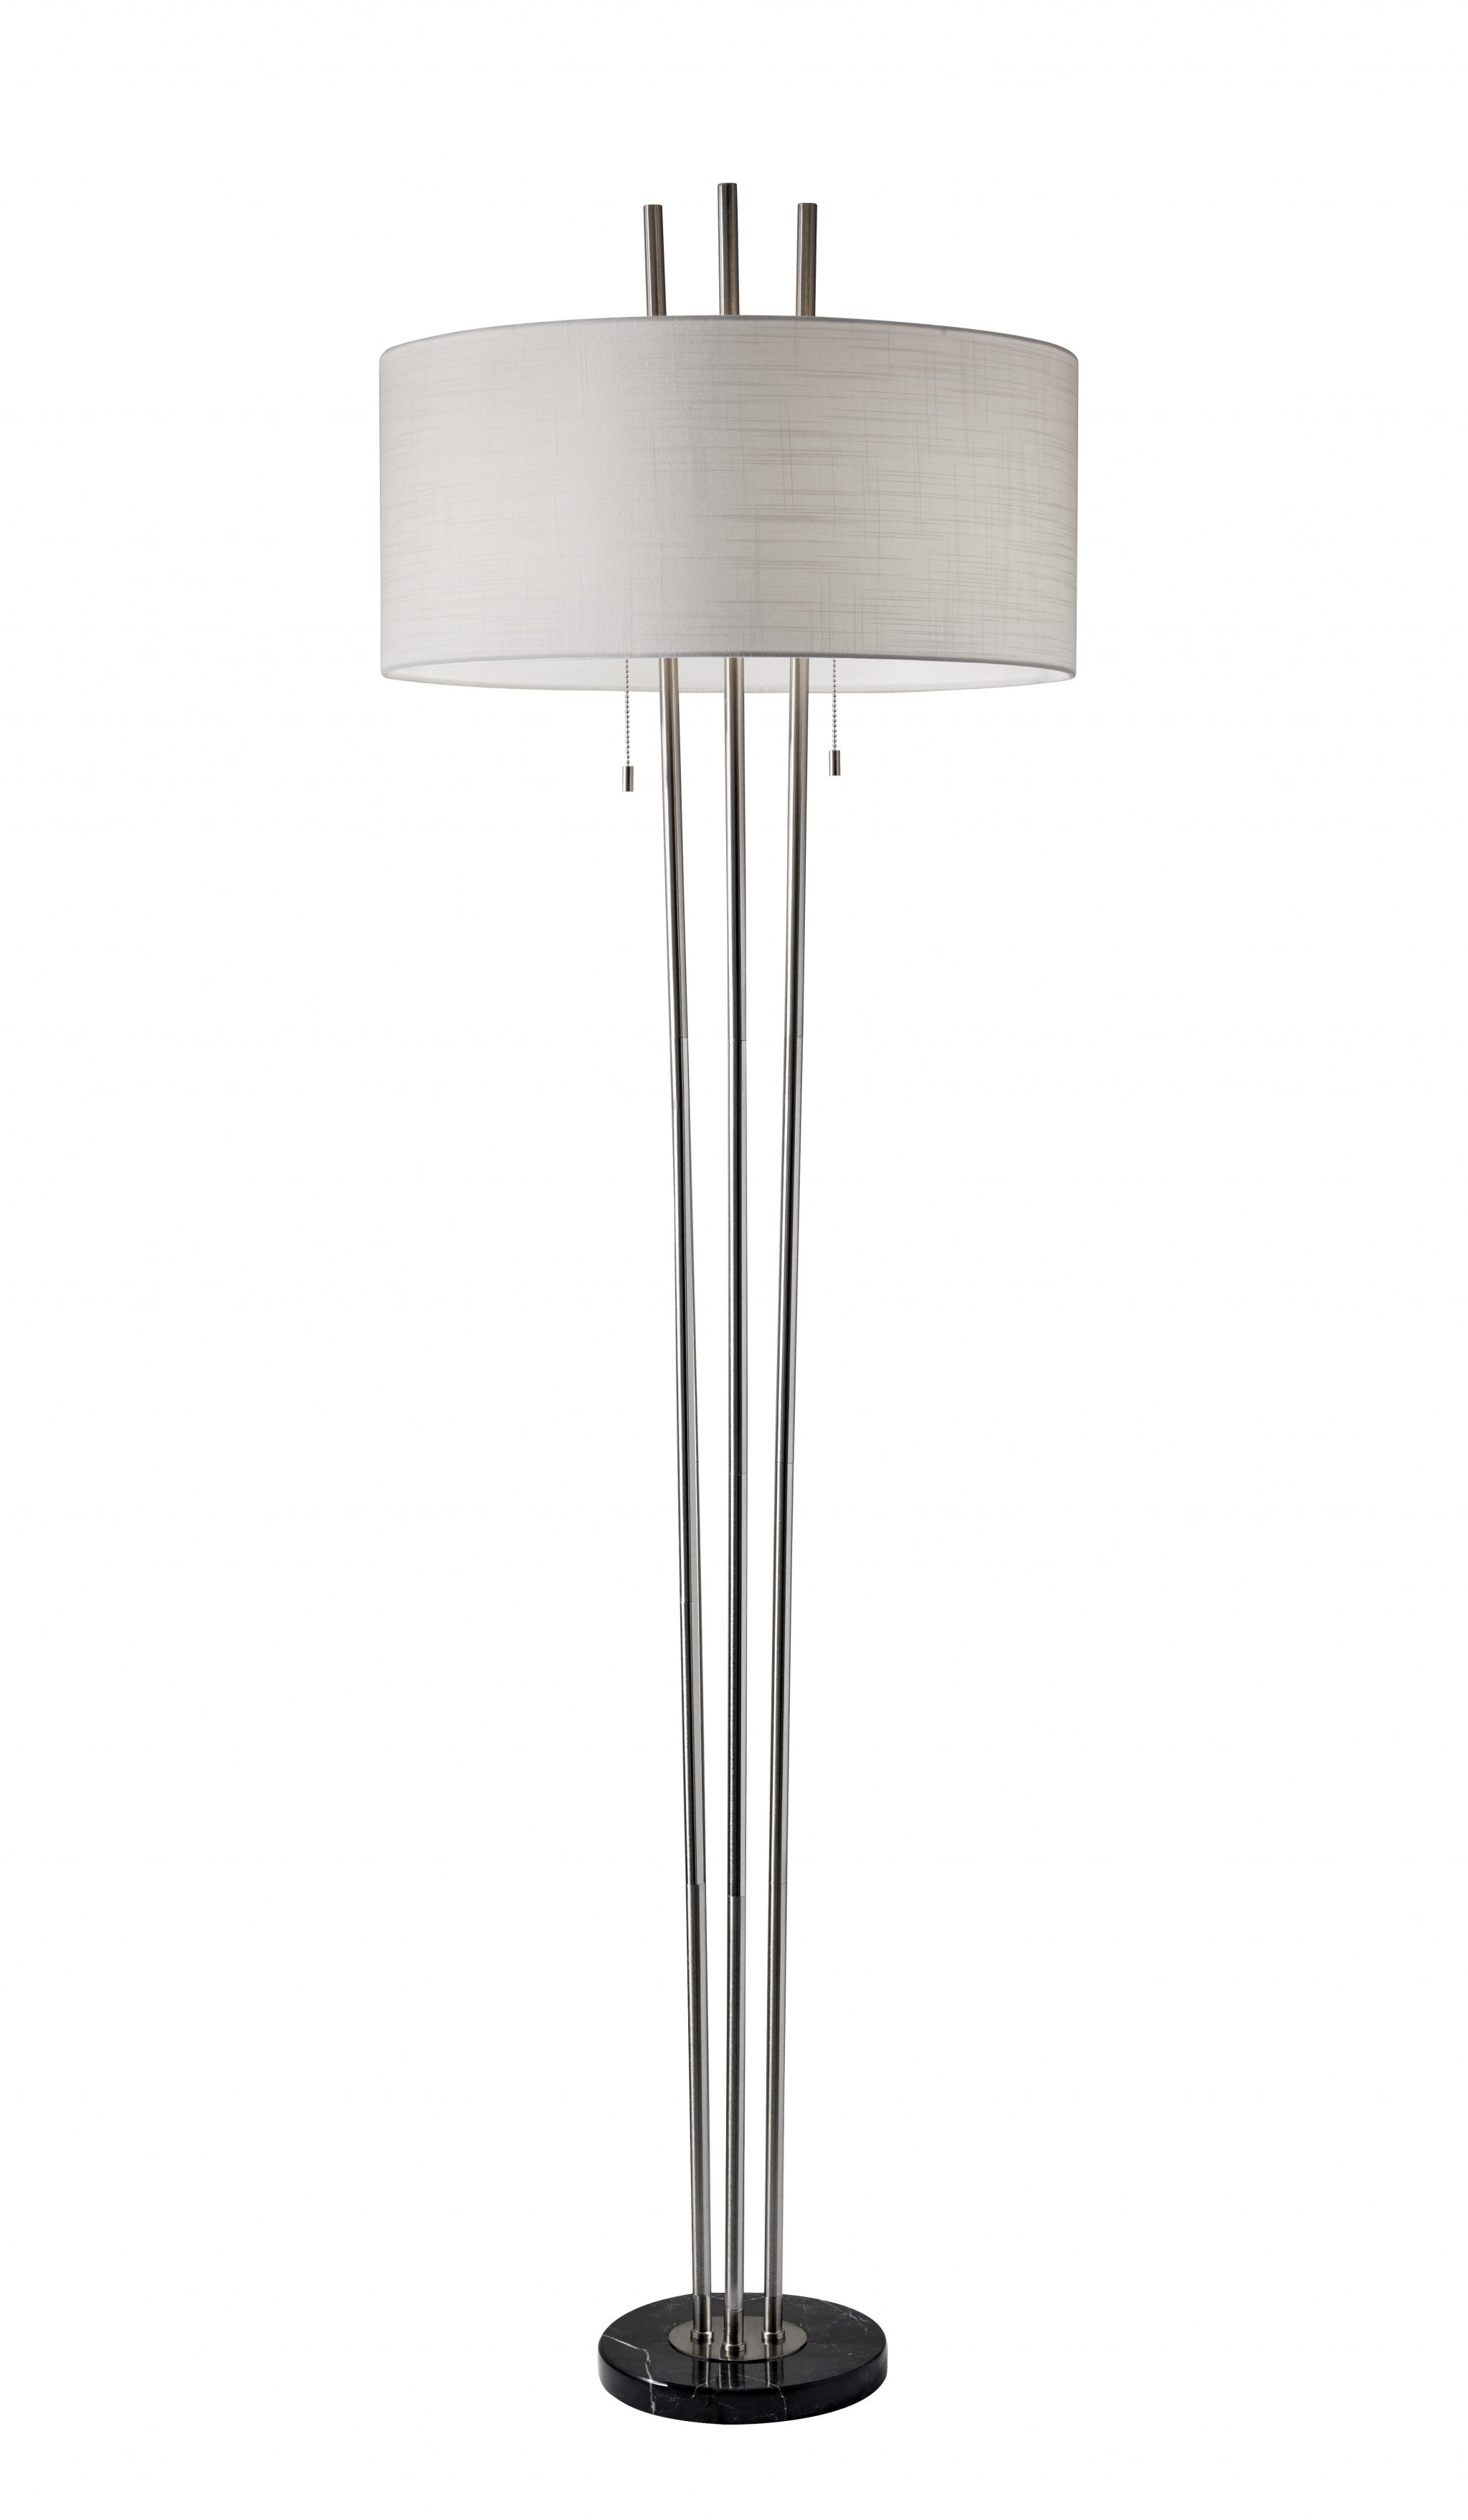 71" Two Light Traditional Shaped Floor Lamp With White Drum Shade